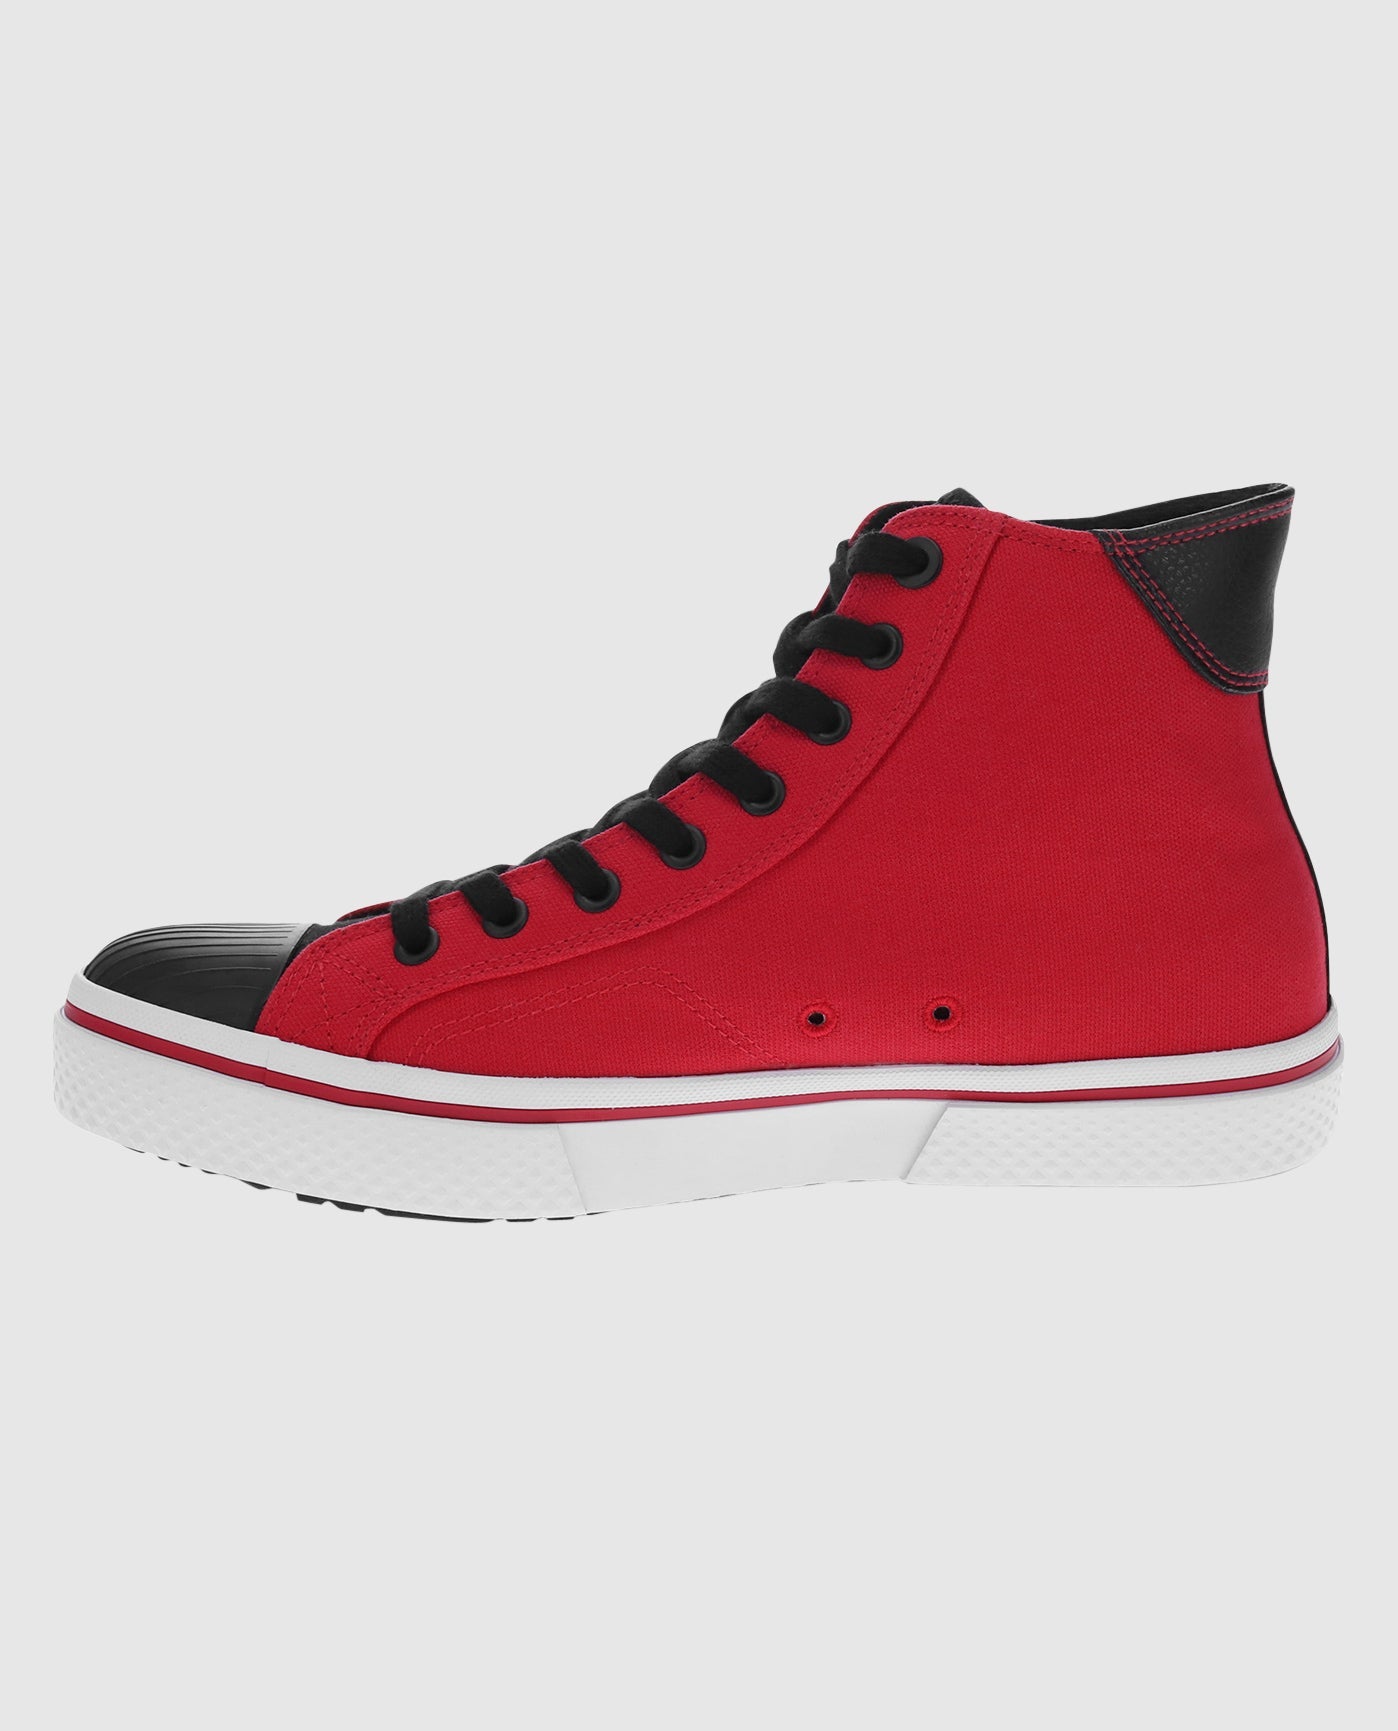 Inside Side View Of Starter Tradition 71 High Red Single Sneaker | Red